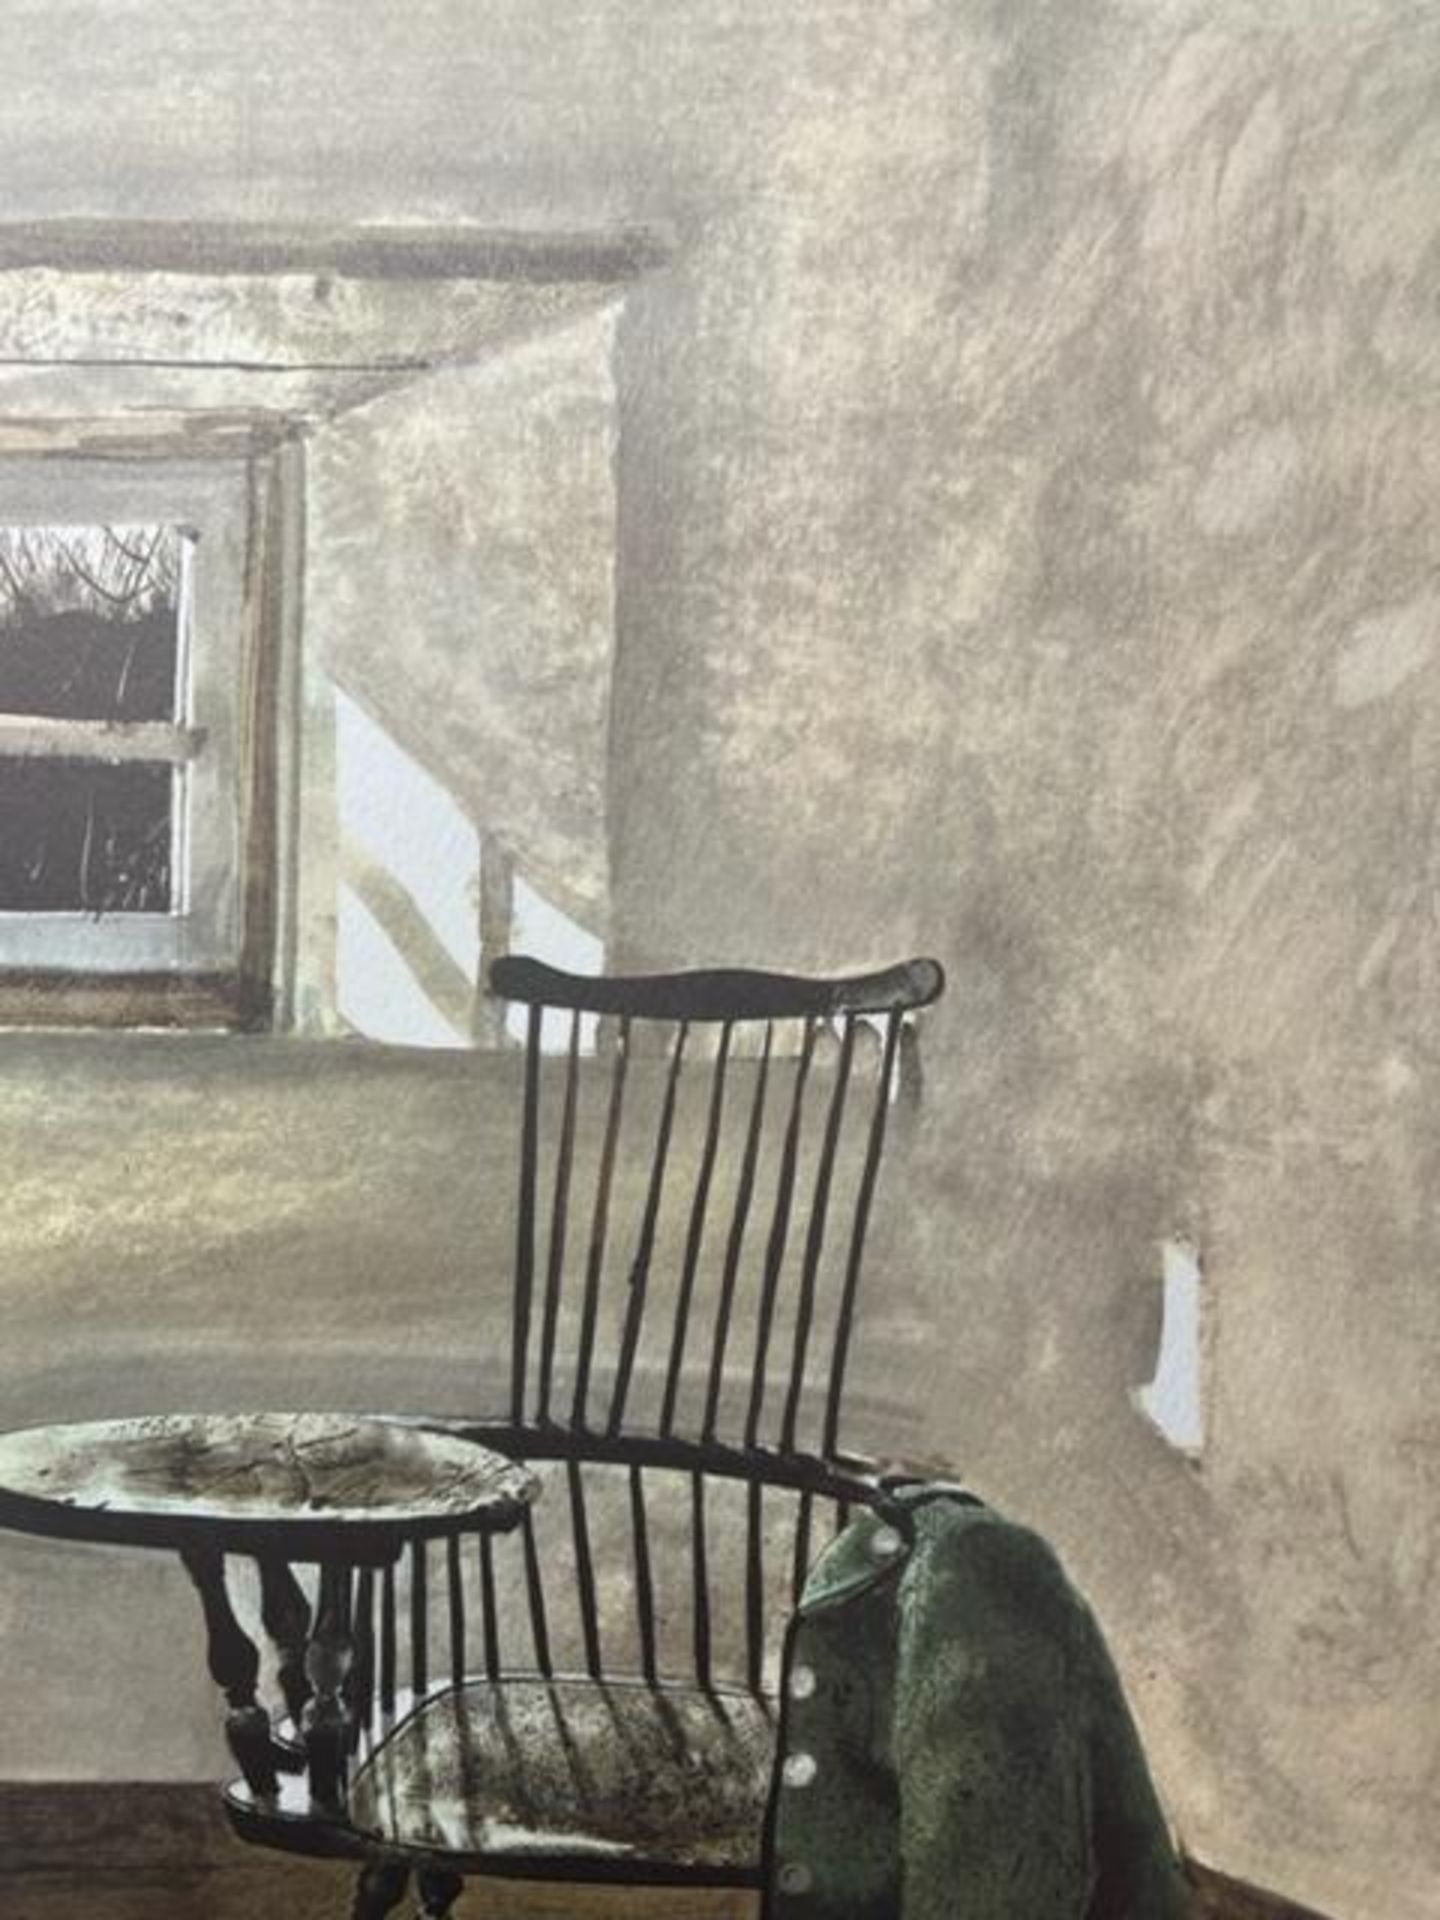 Andrew Wyeth "Early October" Print. - Image 2 of 6